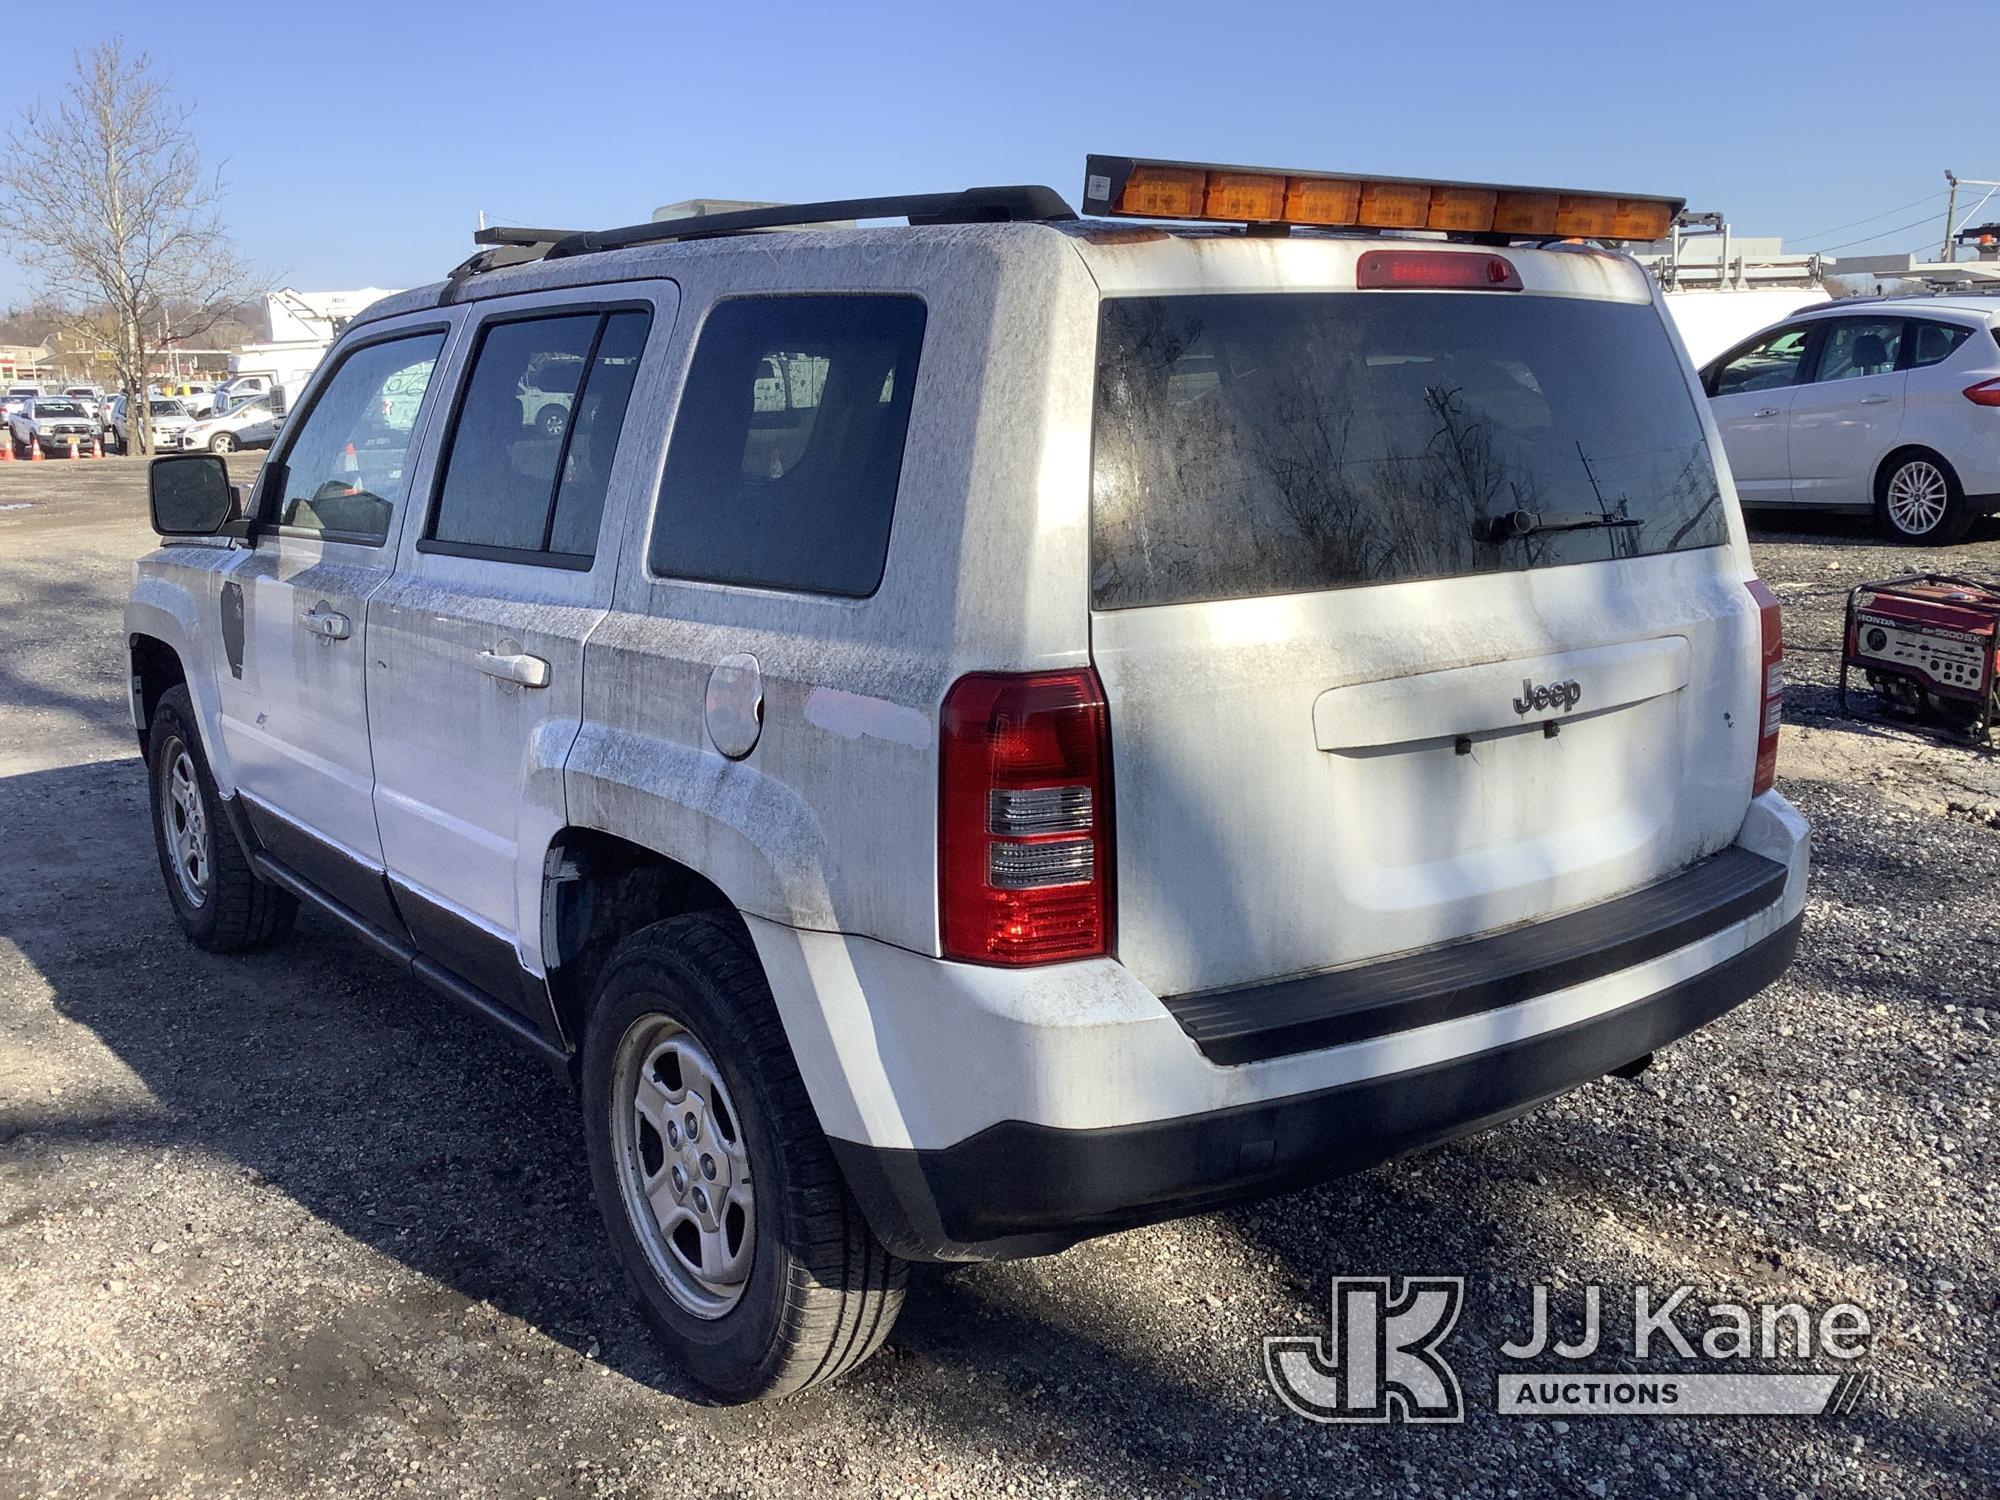 (Plymouth Meeting, PA) 2014 Jeep Patriot 4-Door Sport Utility Vehicle Runs & Moves) (Electrical & Fu